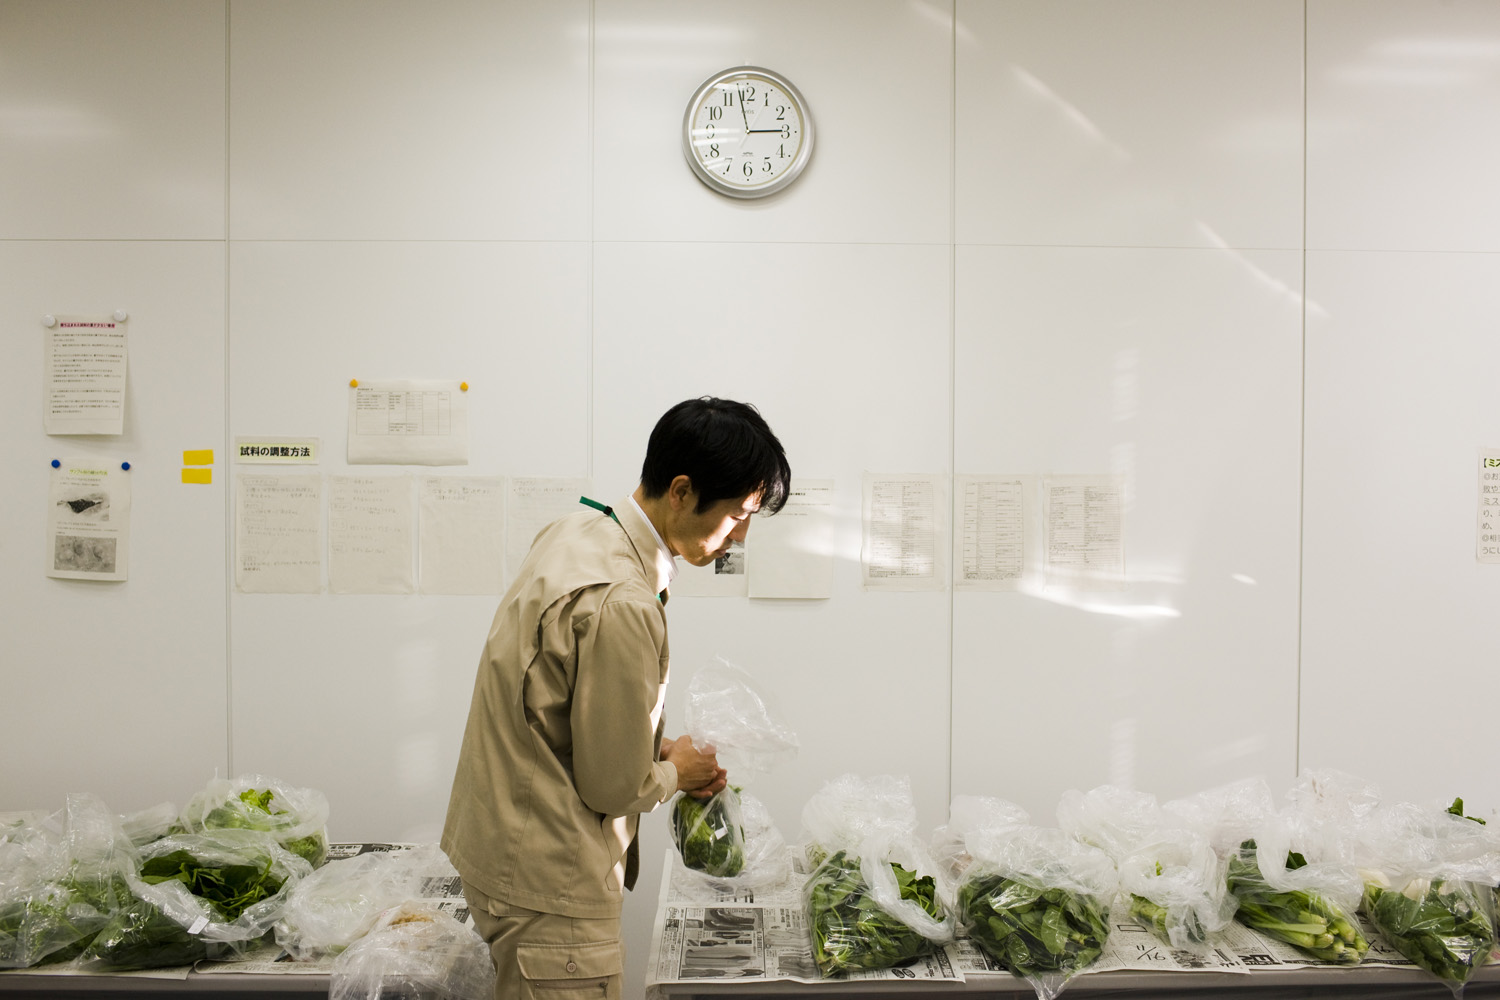 Japan, Koriyama, 2011. A worker inside the Fukushima Agricultural Technology Centre in Koriyama prepares vegetables from Fukushima for examination. Radiation levels in vegetables are checked before the food is approved for trade and consumption.